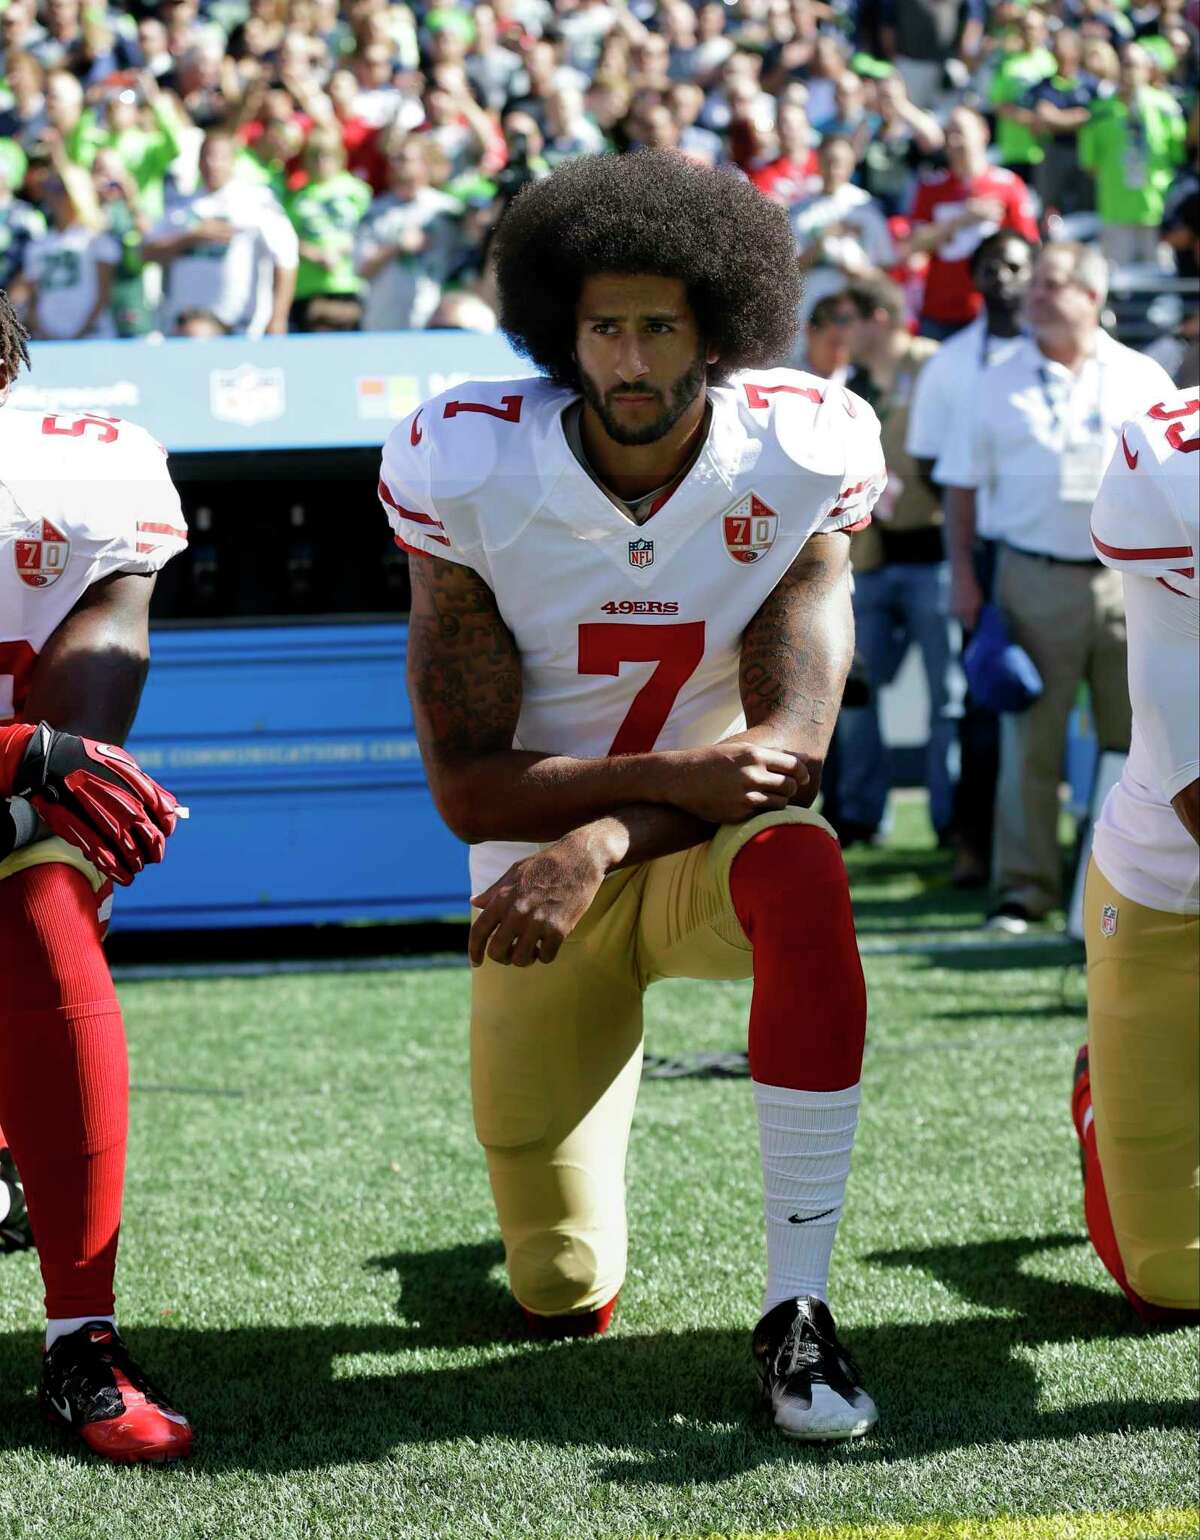 FILE - In this Sept. 25, 2016, file photo, San Francisco 49ers' Colin Kaepernick kneels during the national anthem before an NFL football game against the Seattle Seahawks, in Seattle. Kaepernick has a new deal with Nike, even though the NFL does not want him. Kaepernick’s attorney, Mark Geragos, made the announcement on Twitter, calling the former 49ers quarterback an “All American Icon” and crediting attorney Ben Meiselas for getting the deal done. (AP Photo/Ted S. Warren, File)